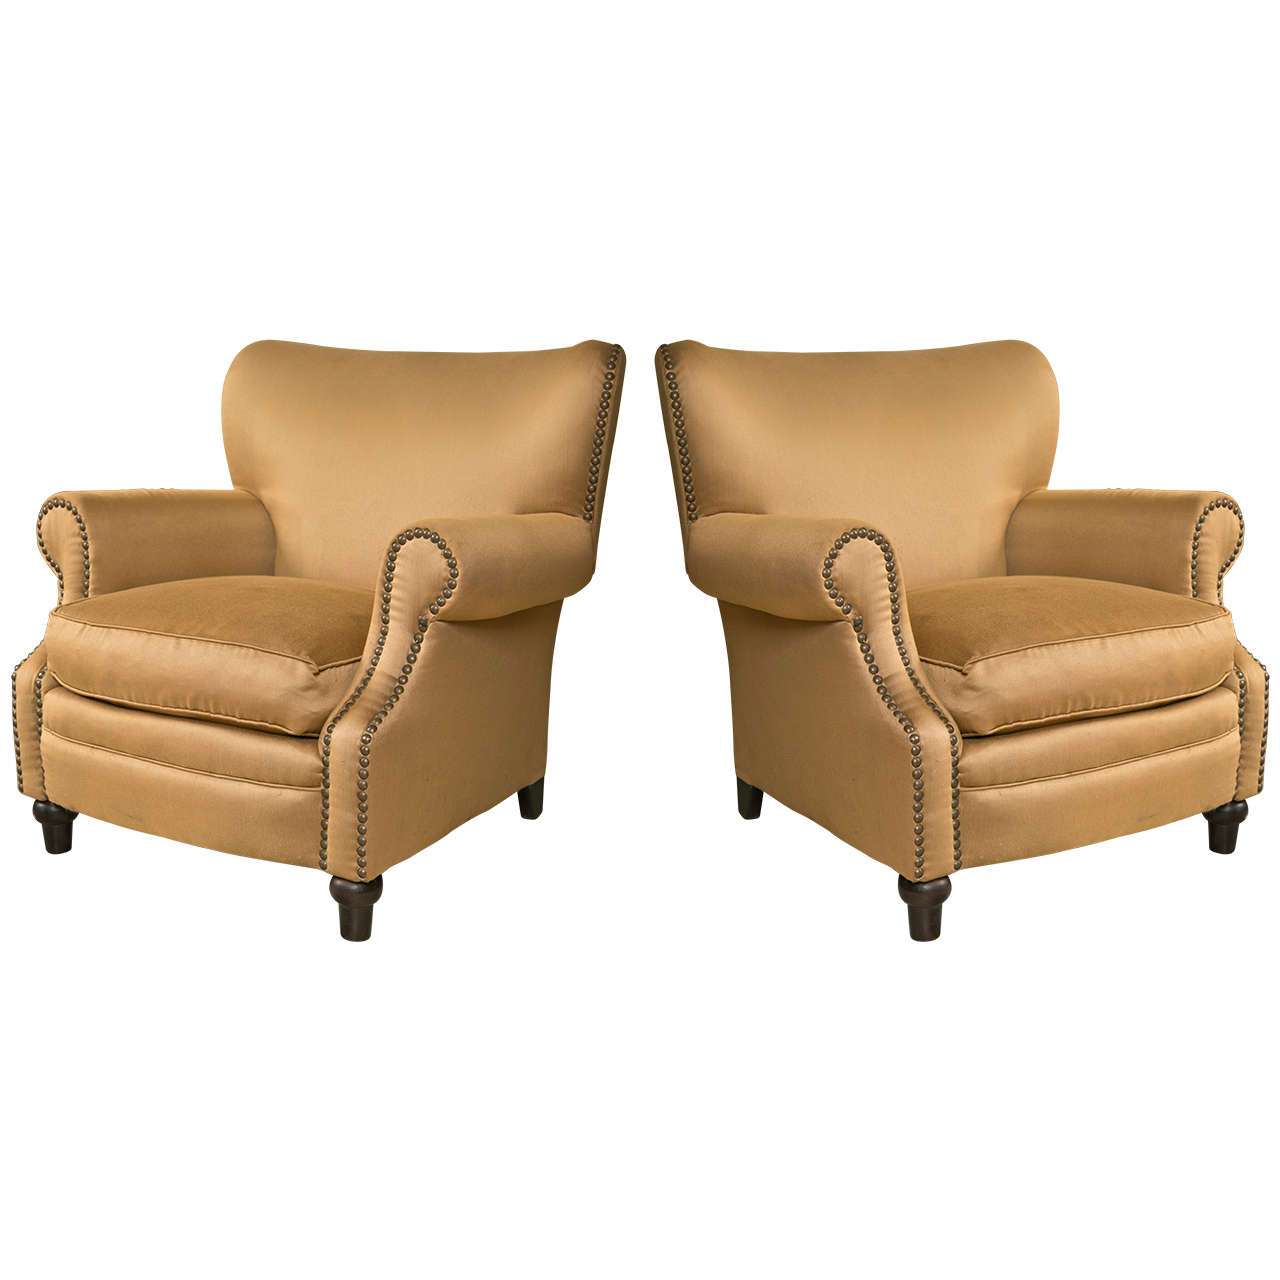 Pair of Overstuffed Oversized Arm Lounge Chairs